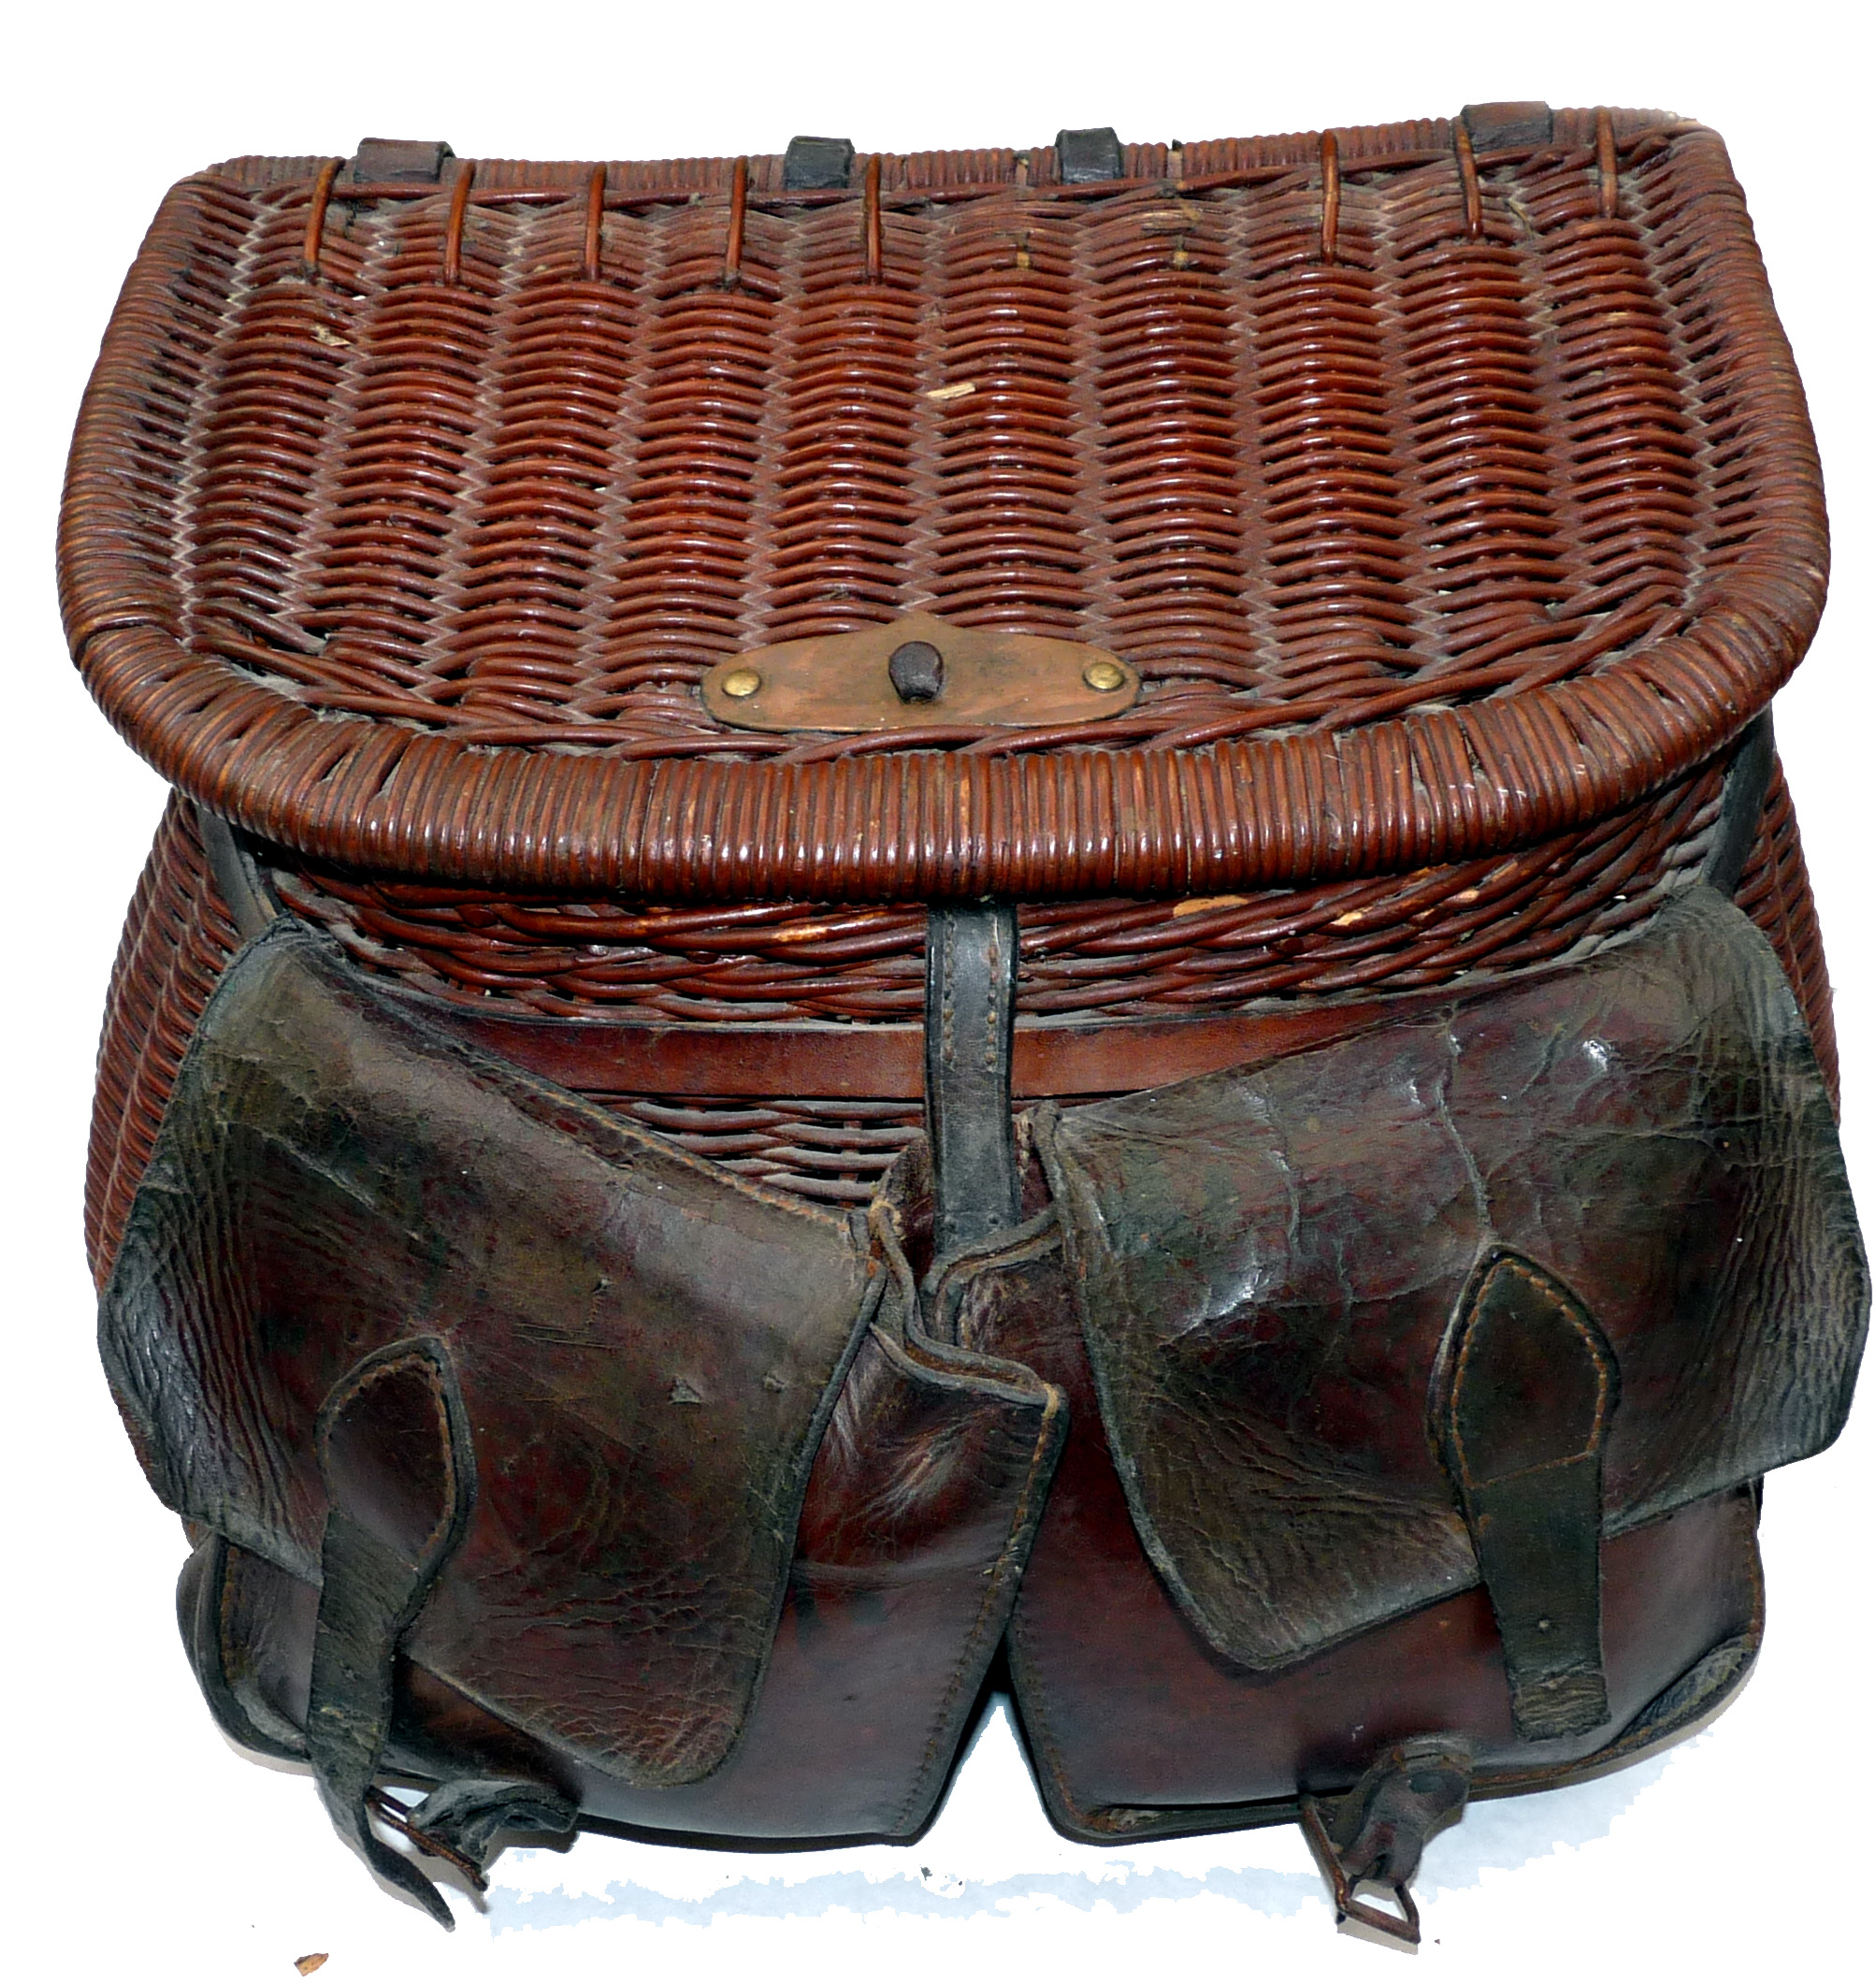 CREEL: Decorative stained willow fly fisher’s creel with leather pockets, creel measures approx. 16”